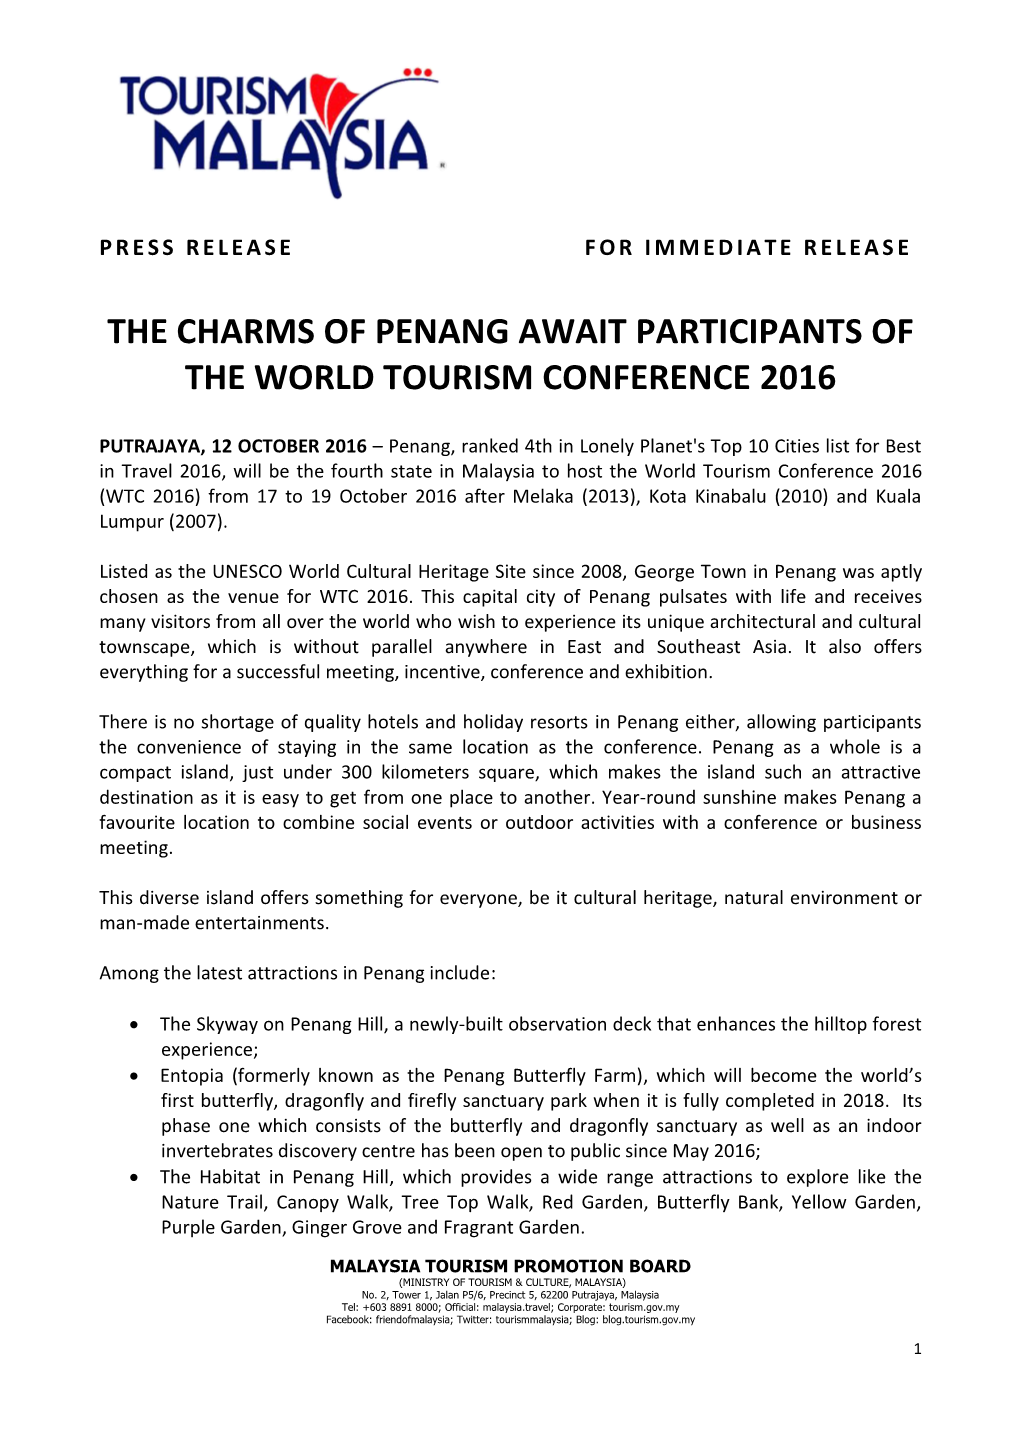 The Charms of Penang Await Participants of the World Tourism Conference 2016